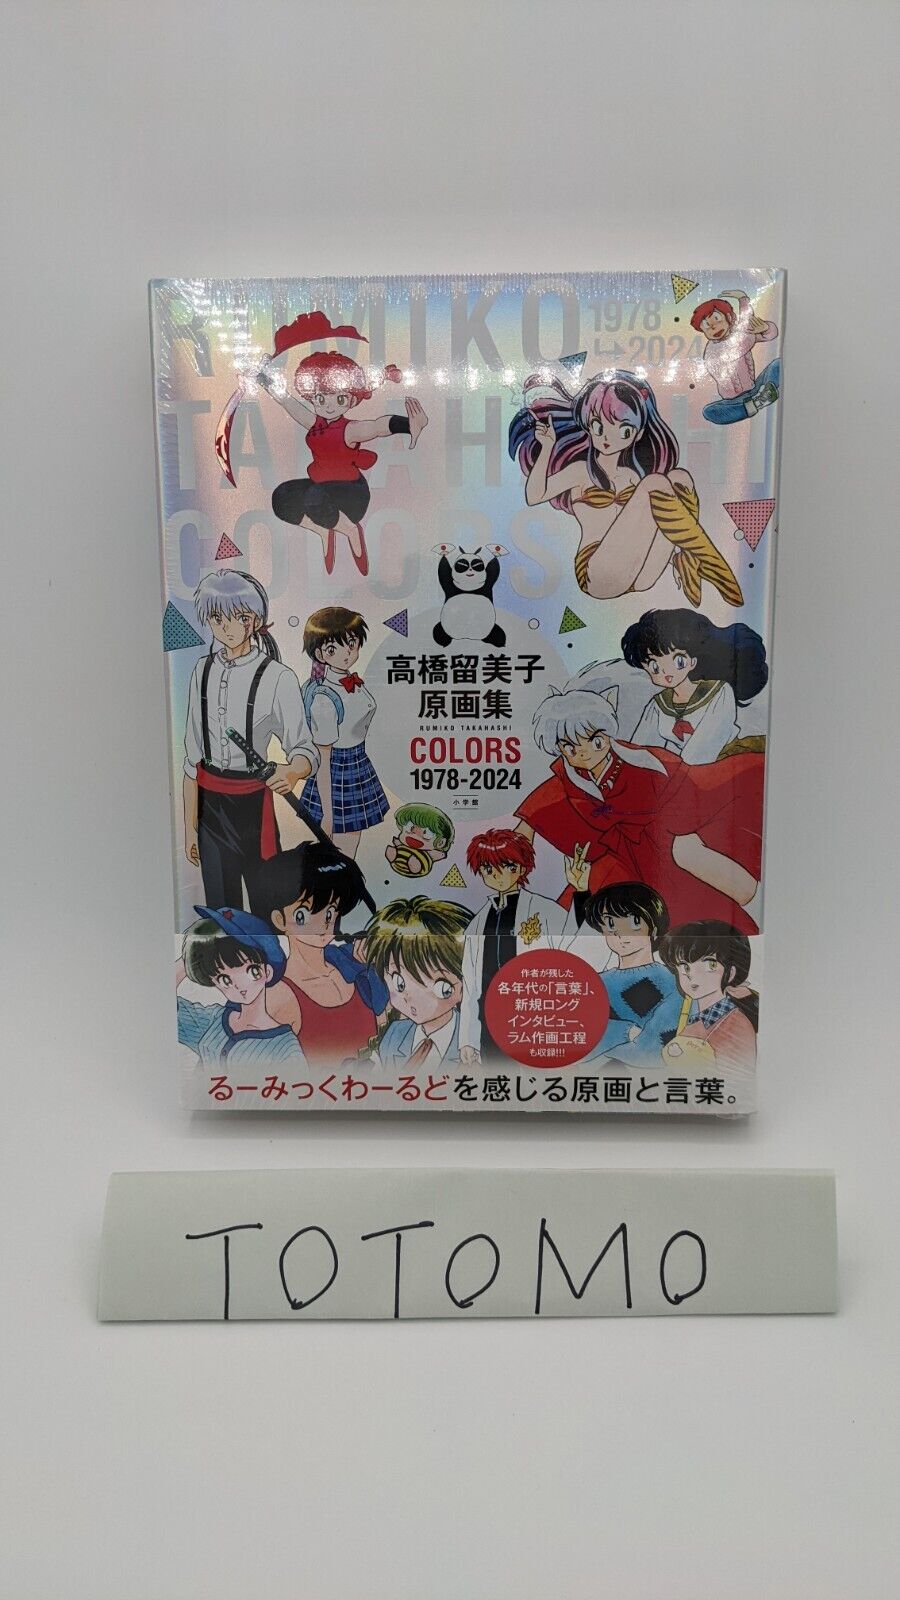 Rumiko Takahashi Art Works COLORS 1978 - 2024 Book shipping from Japan NEW